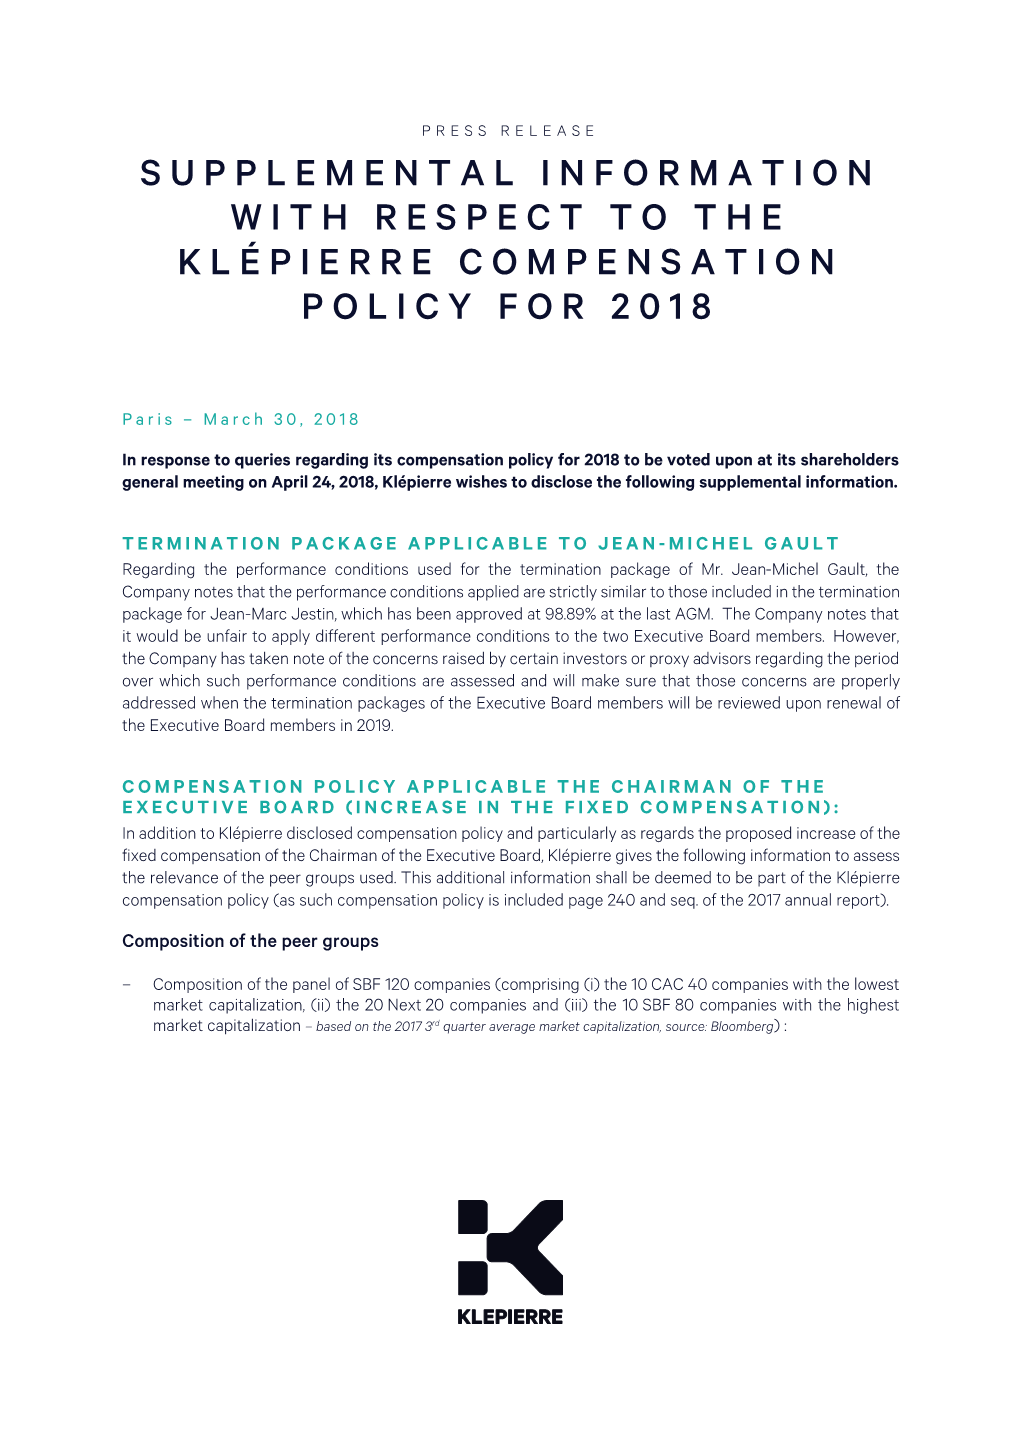 Supplemental Information with Respect to the Klépierre Compensation Policy for 2018